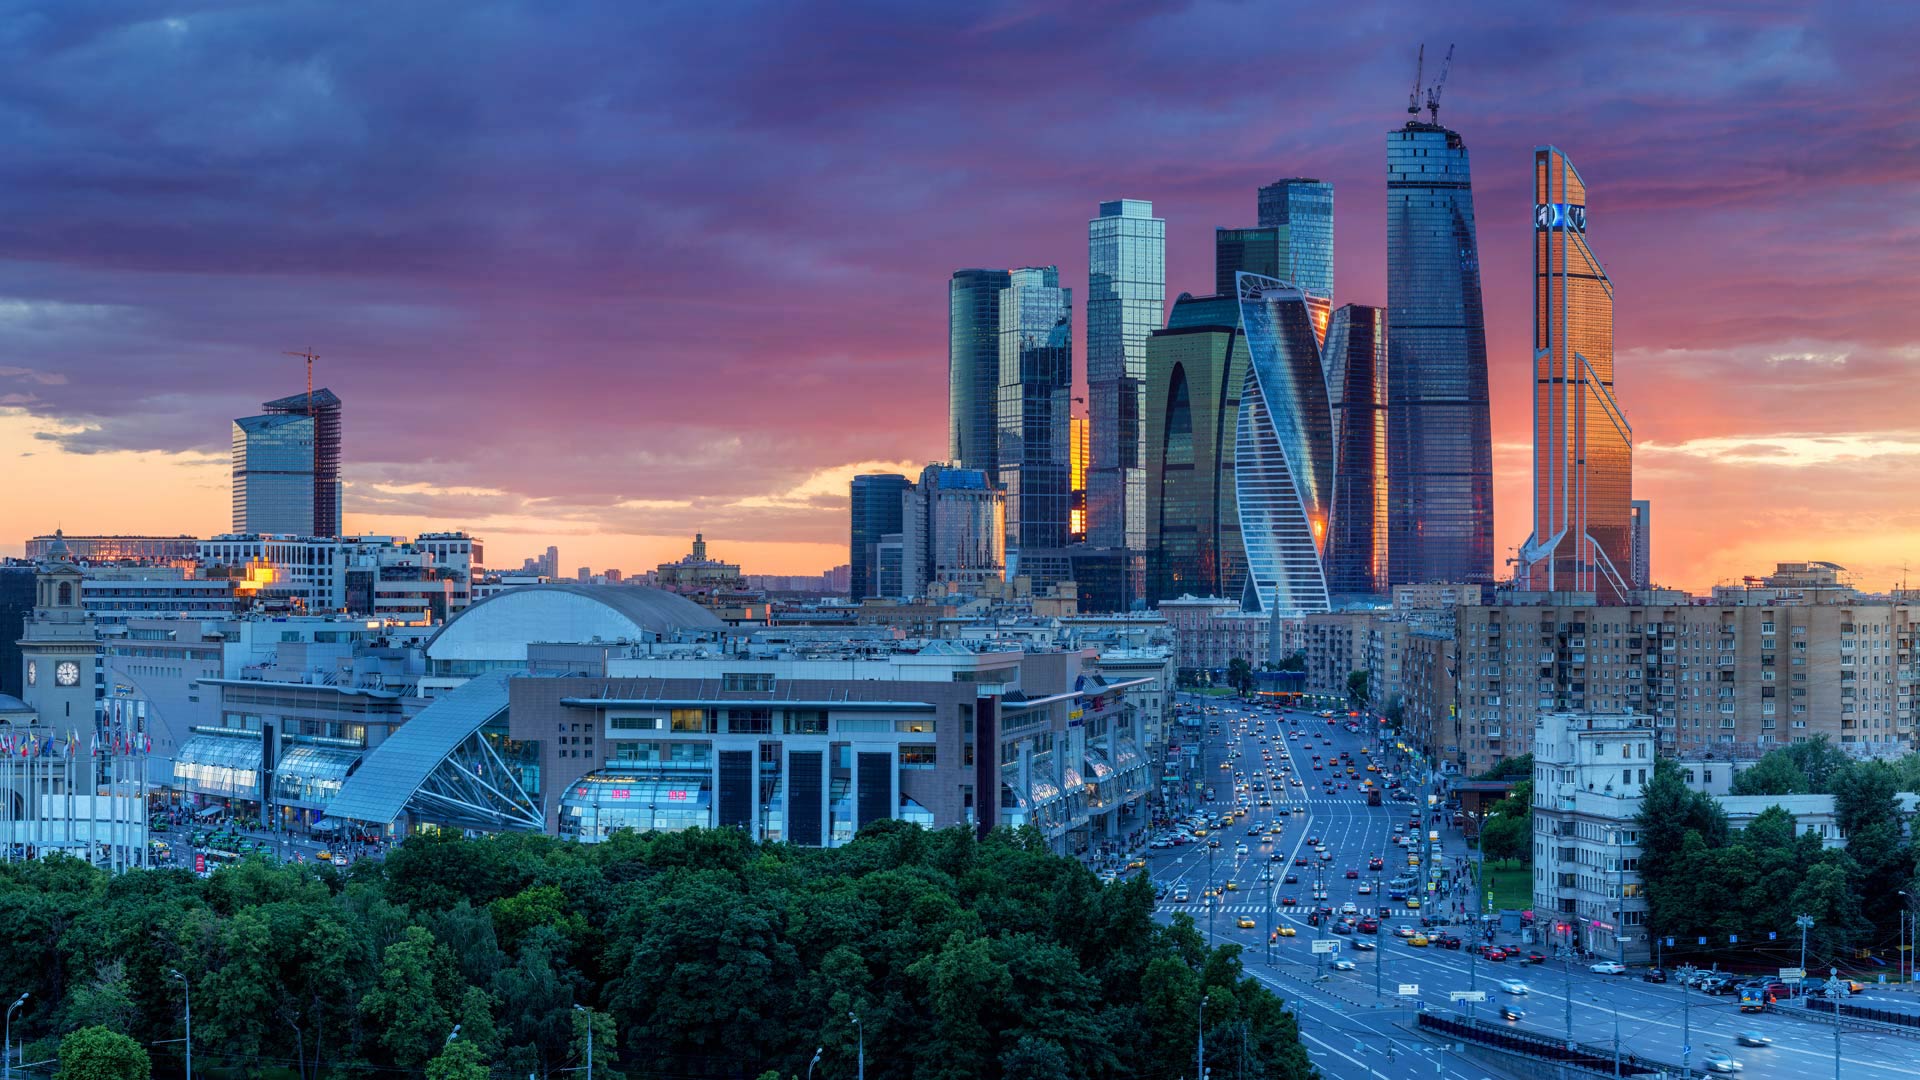 Mobile - Moscow International Business Center , HD Wallpaper & Backgrounds